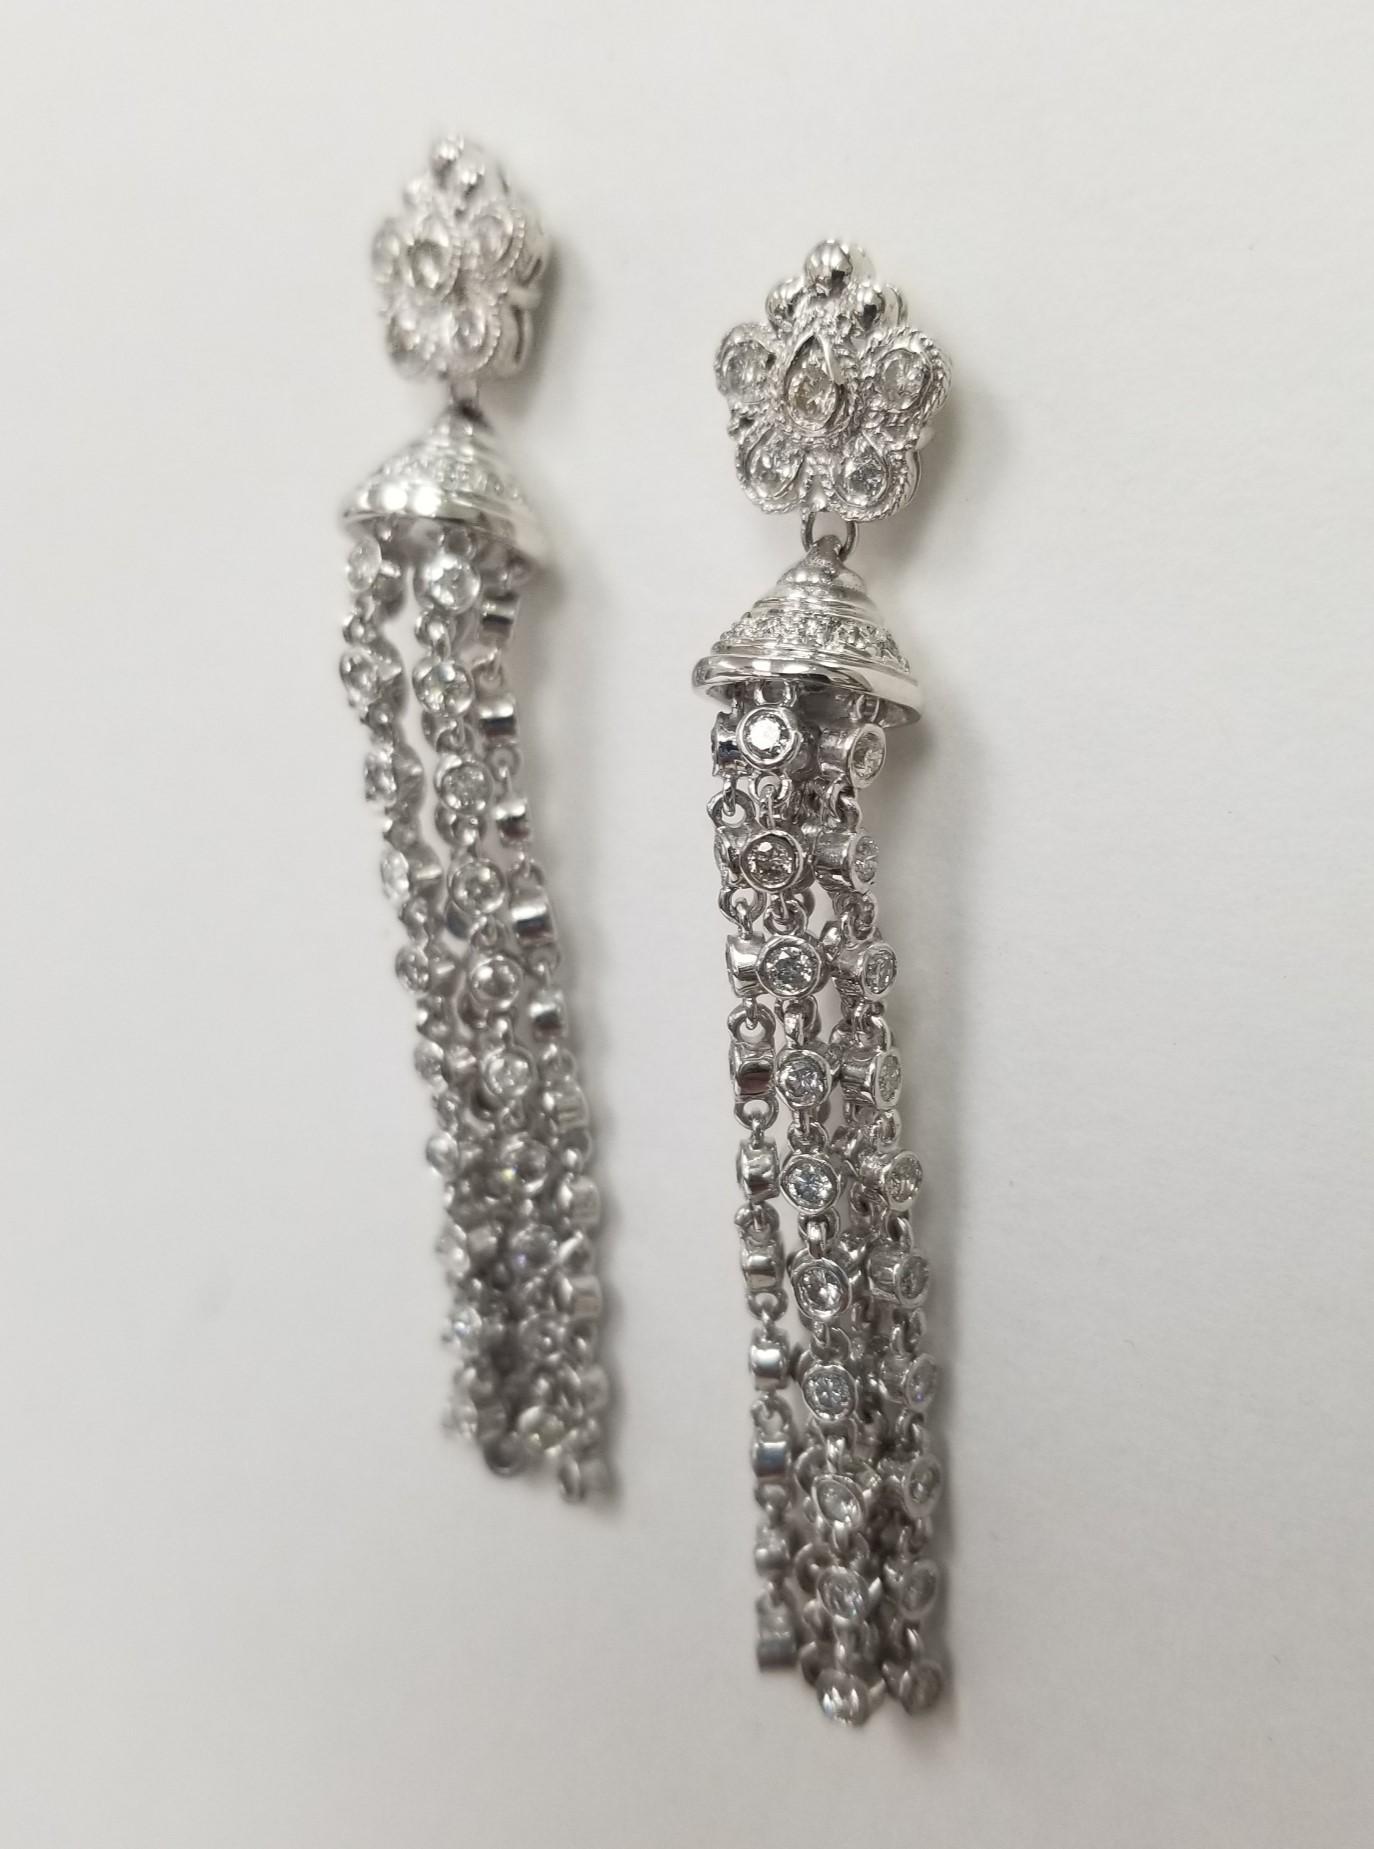 14k white gold diamond dangle earrings, containing 132 round full cut diamonds weighing 3.75cts. and  2 inches of bezel set diamonds dangling from a diamond 